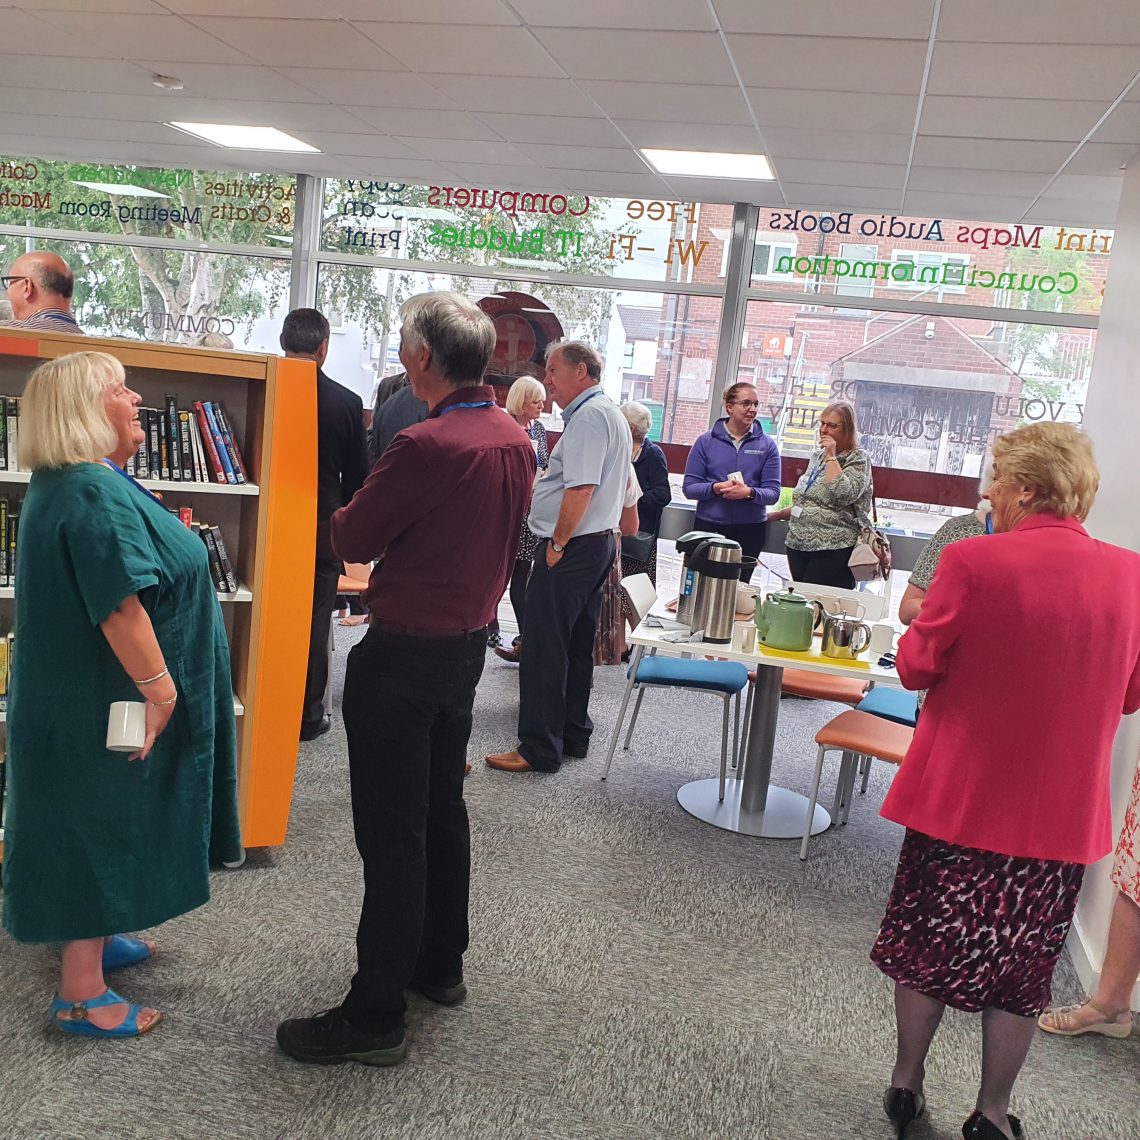 Sherburn & Villages Community Library is officially Re-opened